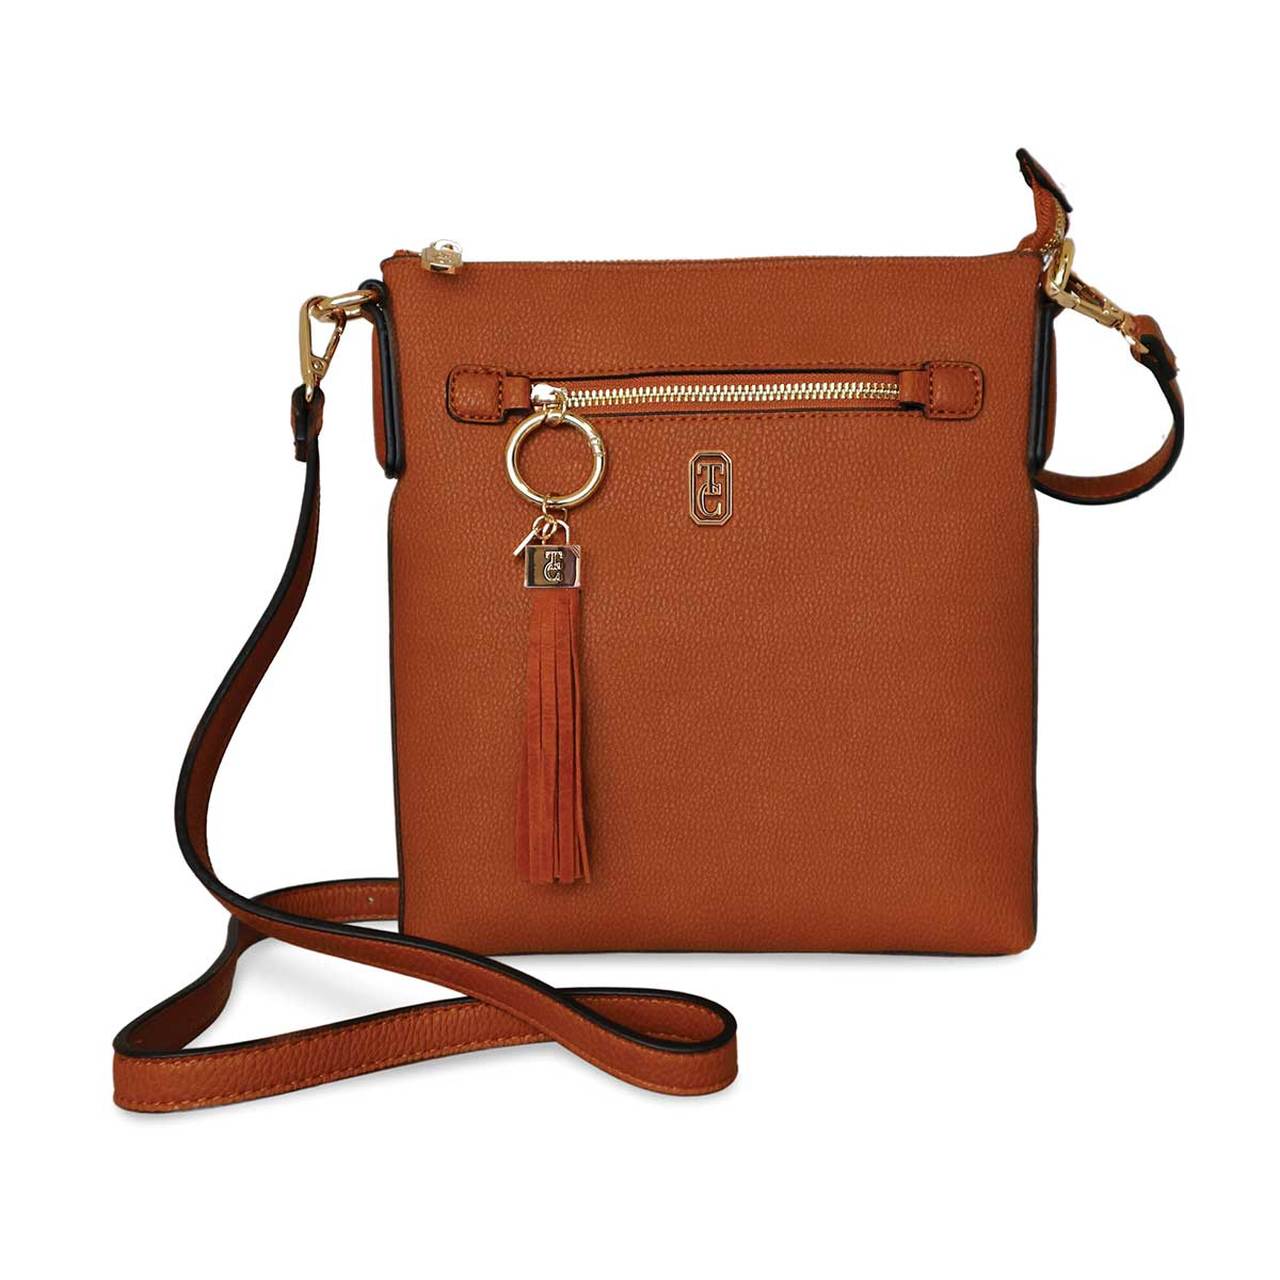 The Chelsea Cross Body Pouch Tan by Tipperary Crystal  The Chelsea Cross Body Pouch Tan - Yellow gold hardware The versatile and trendy Chelsea can be worn as a cross body and also over the shoulder. The Chelsea has an adjustable strap and easily accessible outside pocket and secure front zip pocket. Metal hardware detail finish off this stylish bag in rose gold or yellow gold.